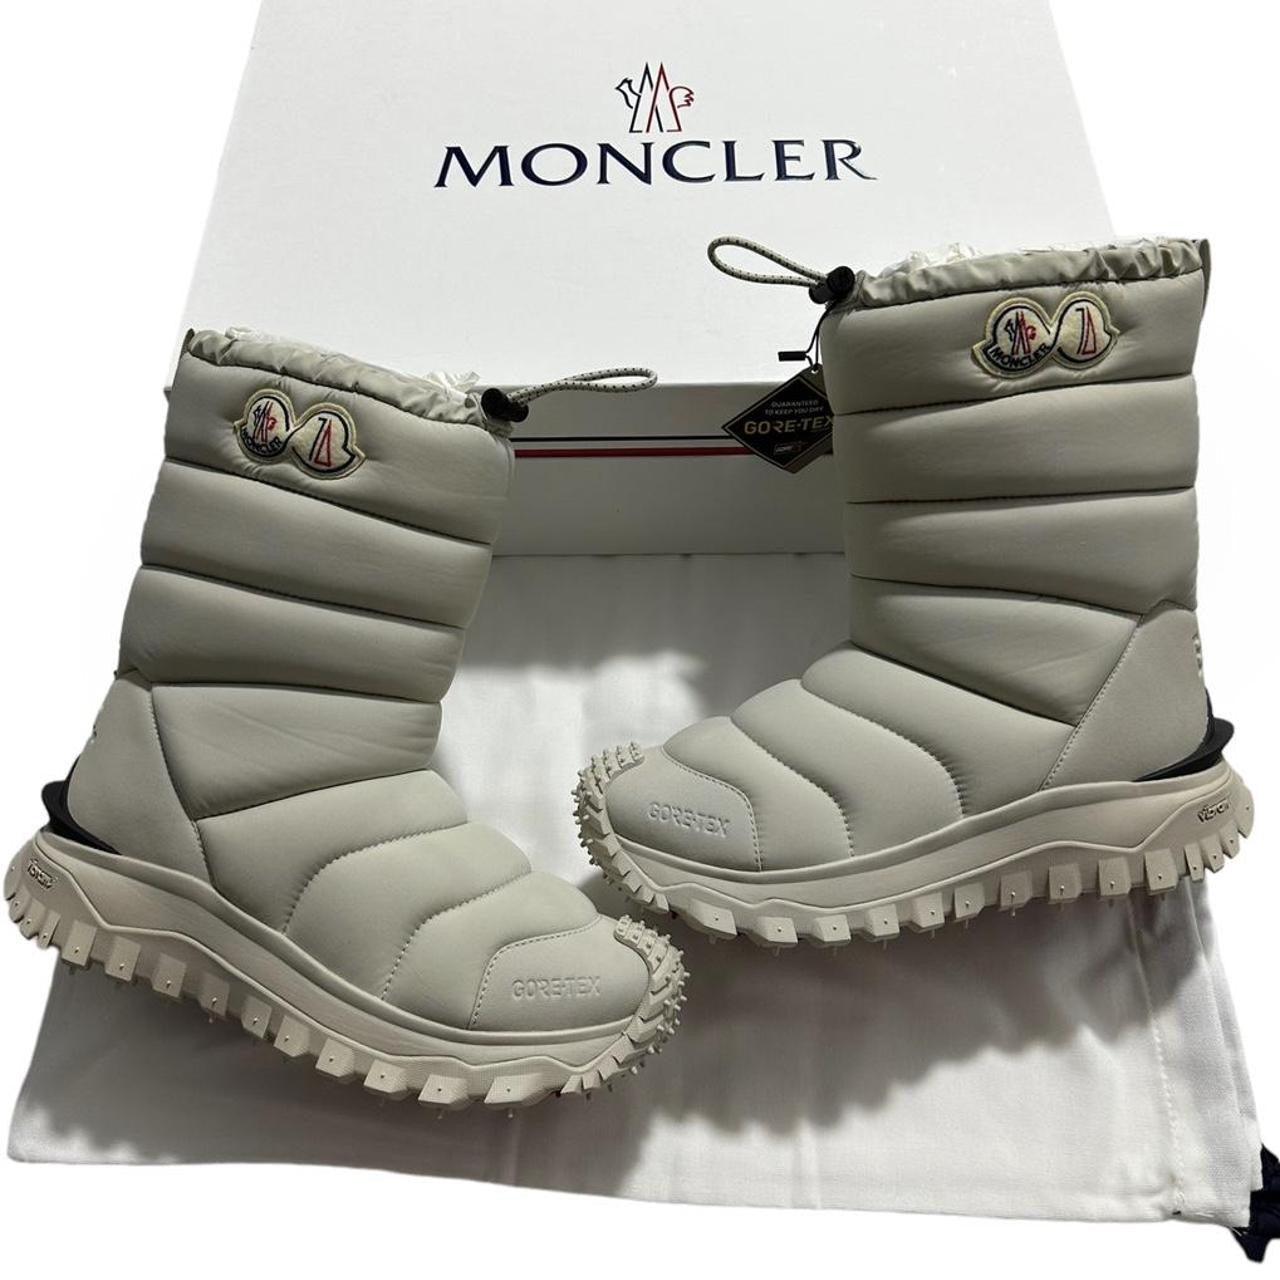 Moncler x End Trailgrip Boots - Known Source